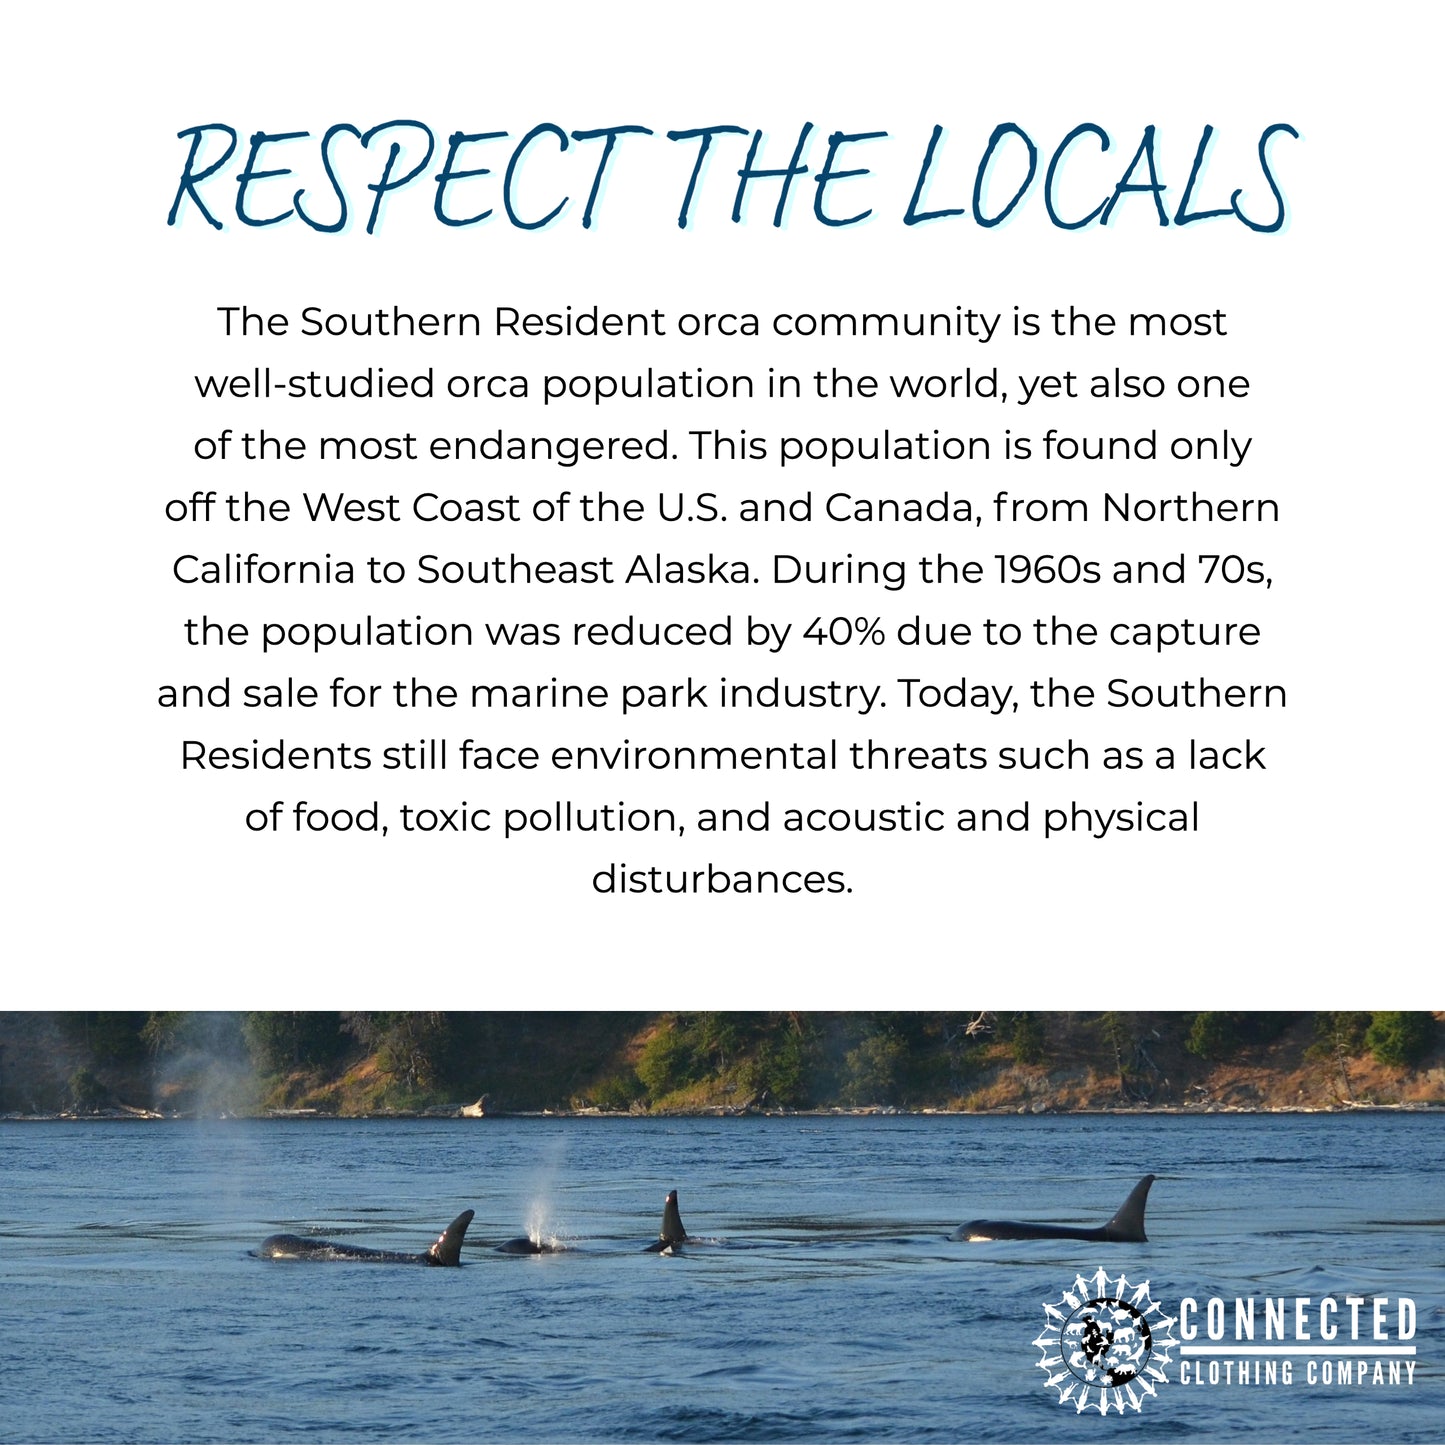 Respect the locals. The southern resident orca community is the most well-studied orca population in the world, yet also one of the most endangered. This population is found only off the West coast of the U.S. and Canada, from northern california to southeast alaska. During the 1960s and 70s, the population was reduced by 40% due to the capture and sale for the marine park industry. Today, the Southern Residents still face environmental threats such as a lack of food, toxic pollution, and ac